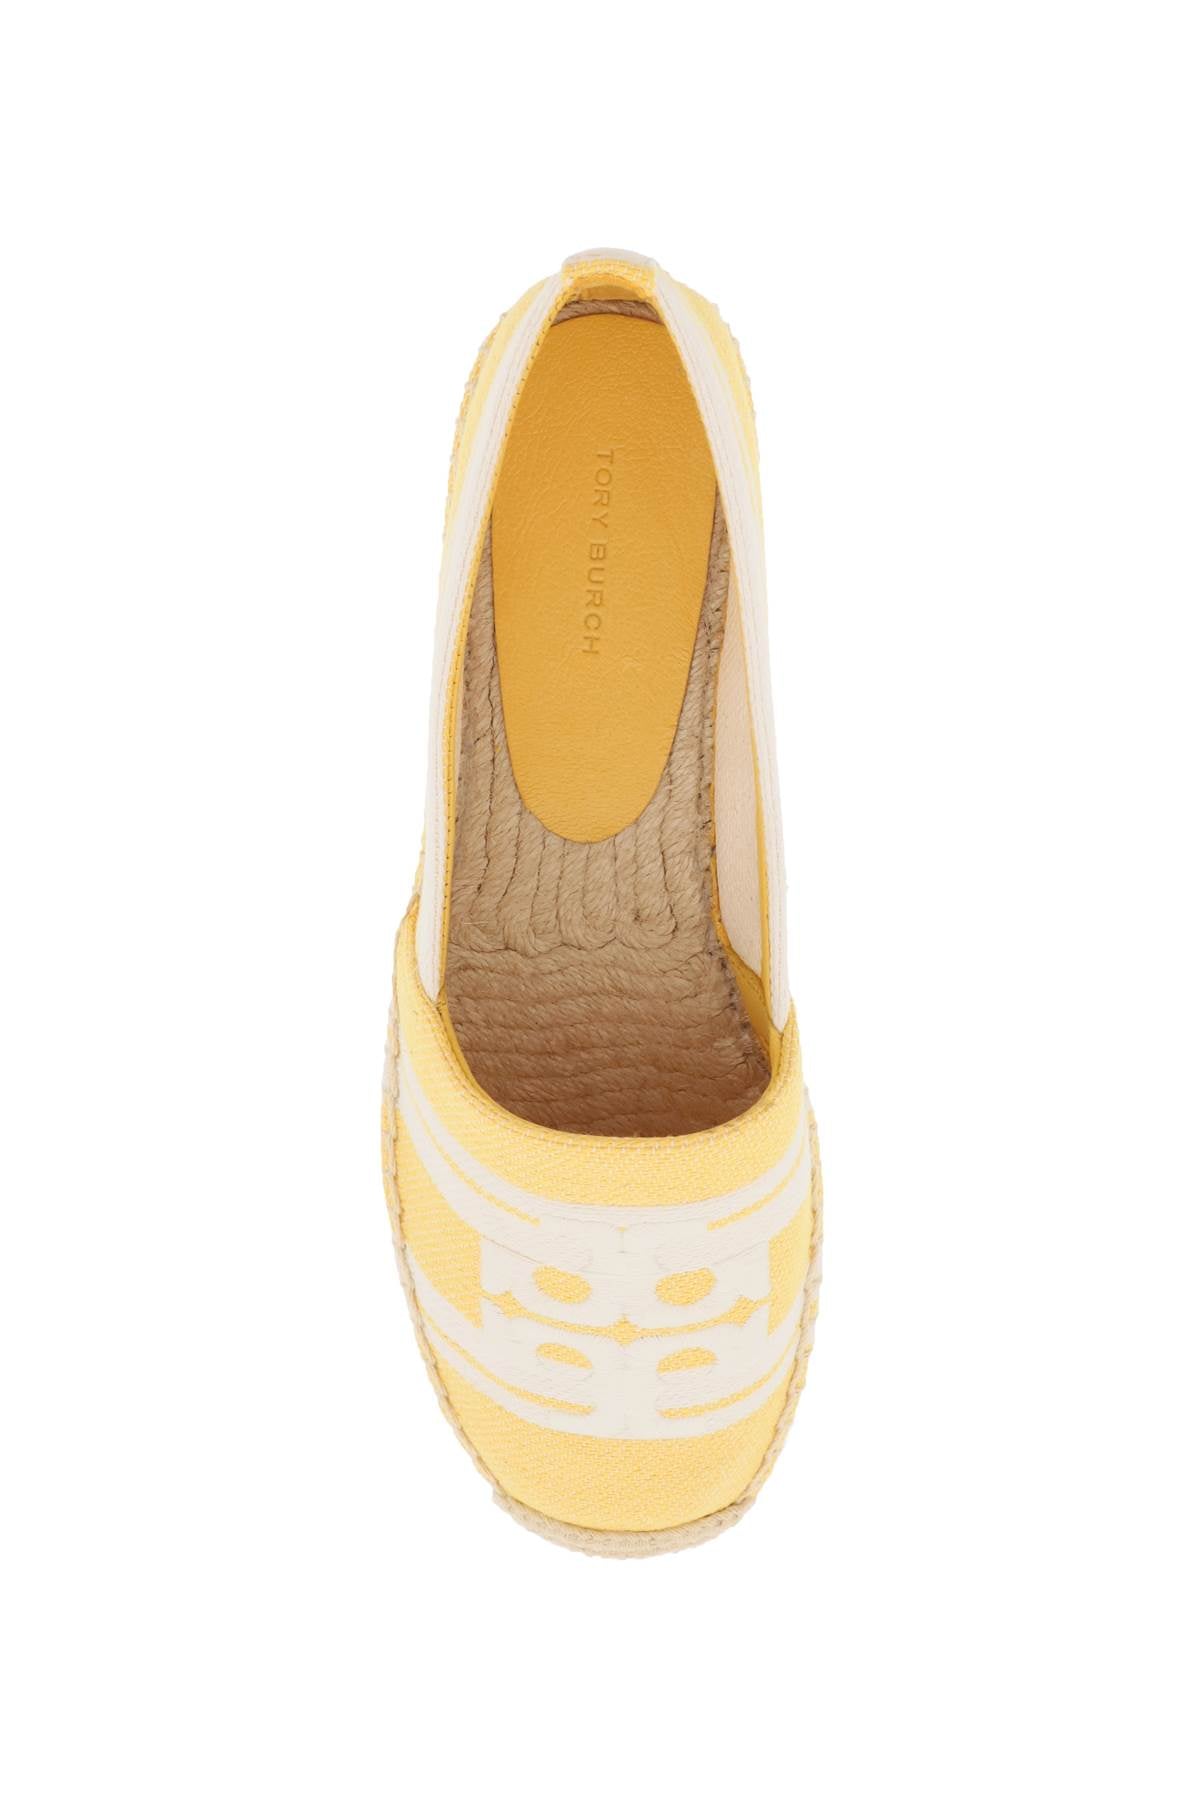 Tory burch striped espadrilles with double t-1